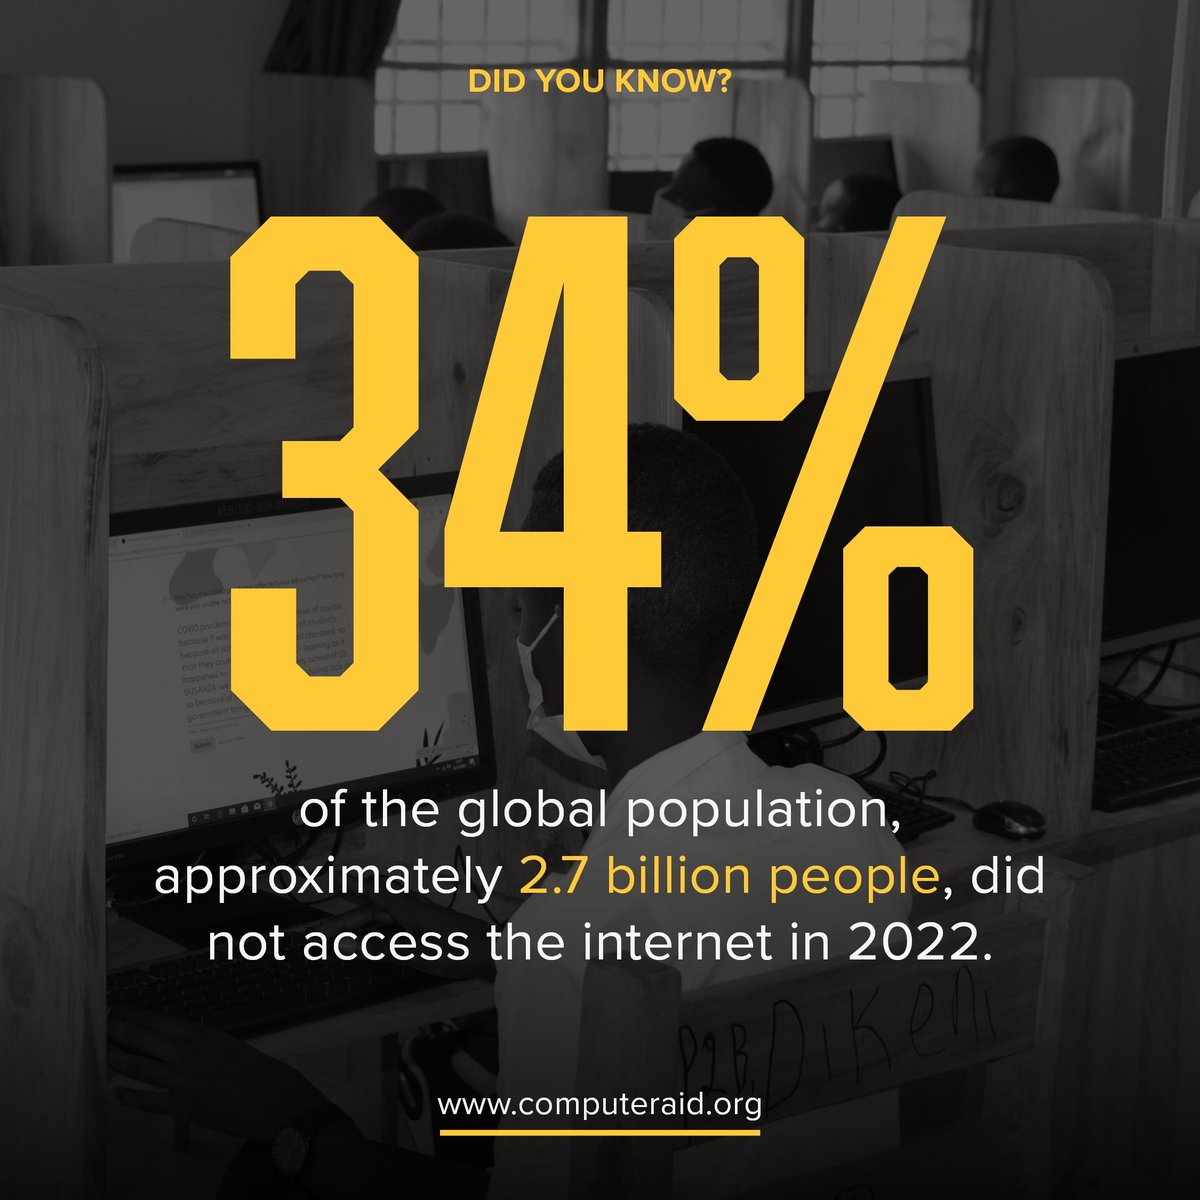 Our latest Impact Report is now available on our website! Read about our accomplishments over 2022/2023 and the impact our work is having on reducing the digital divide.

#ImpactReport #ComputerAid #DigitalDivide #DigitalExclusion